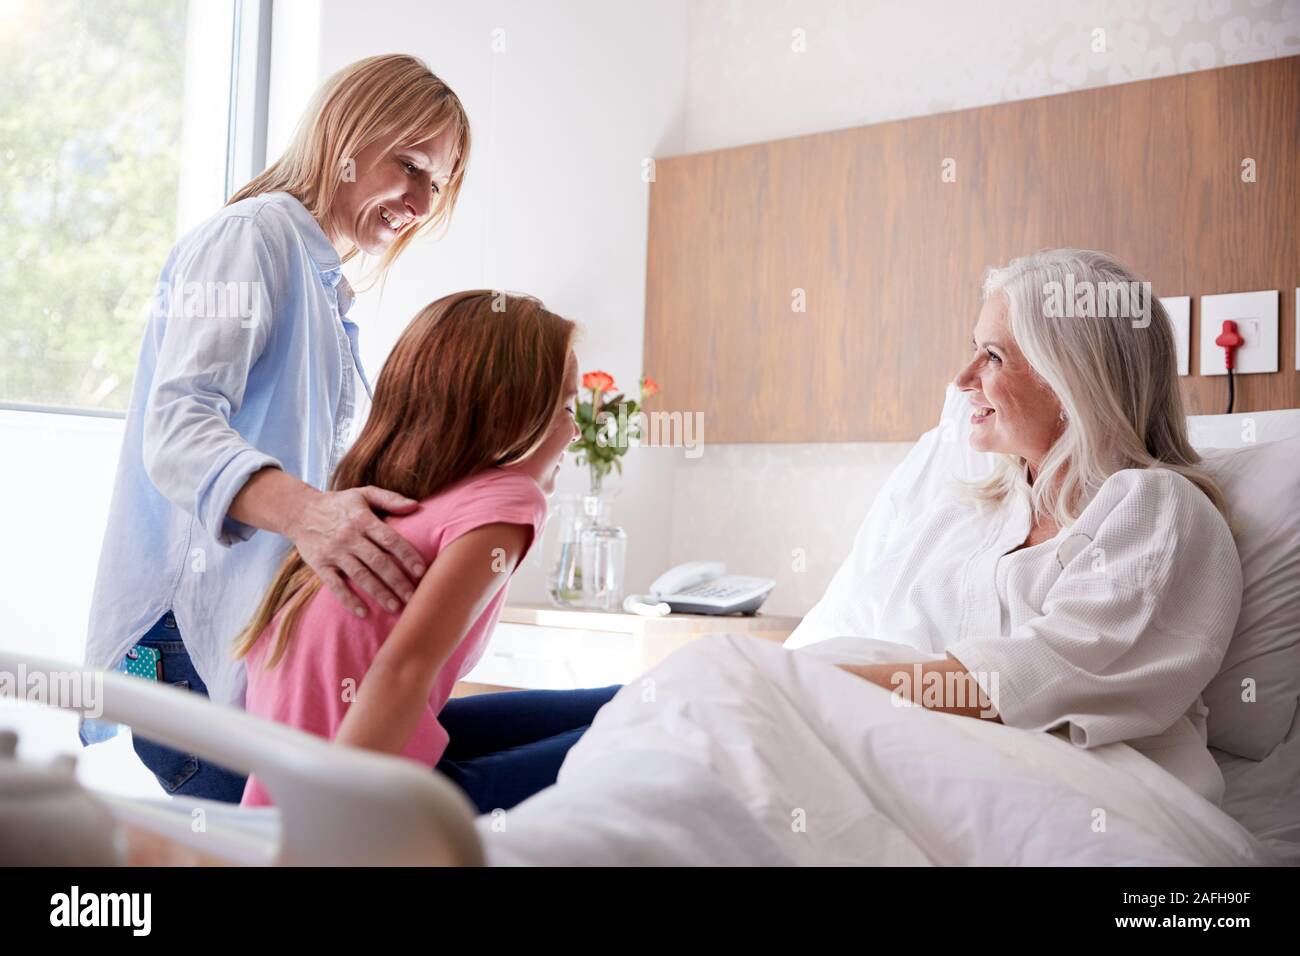 Granddaughter Talking With Grandmother On Family Hospital Visit Stock Photo